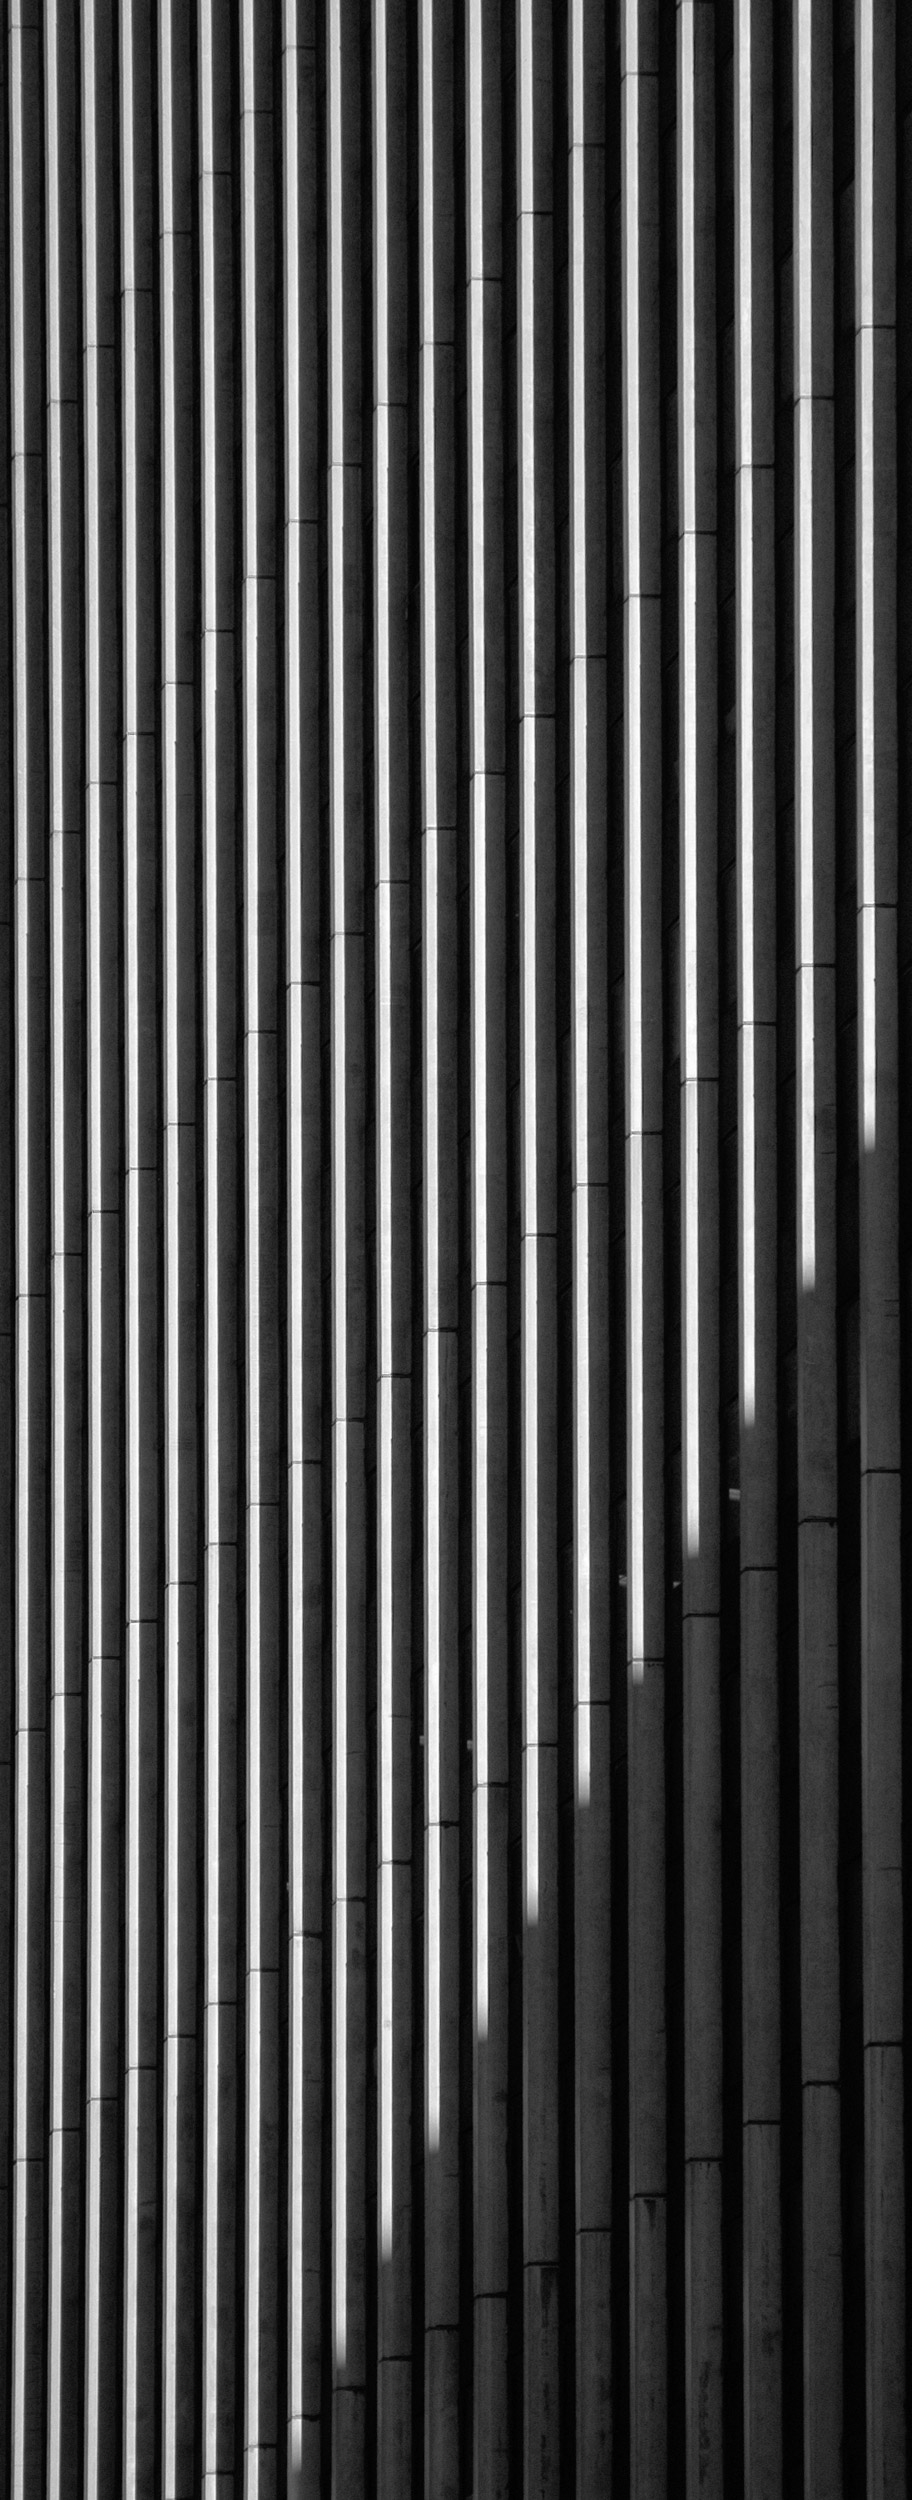 Vertical line pattern in New York City building